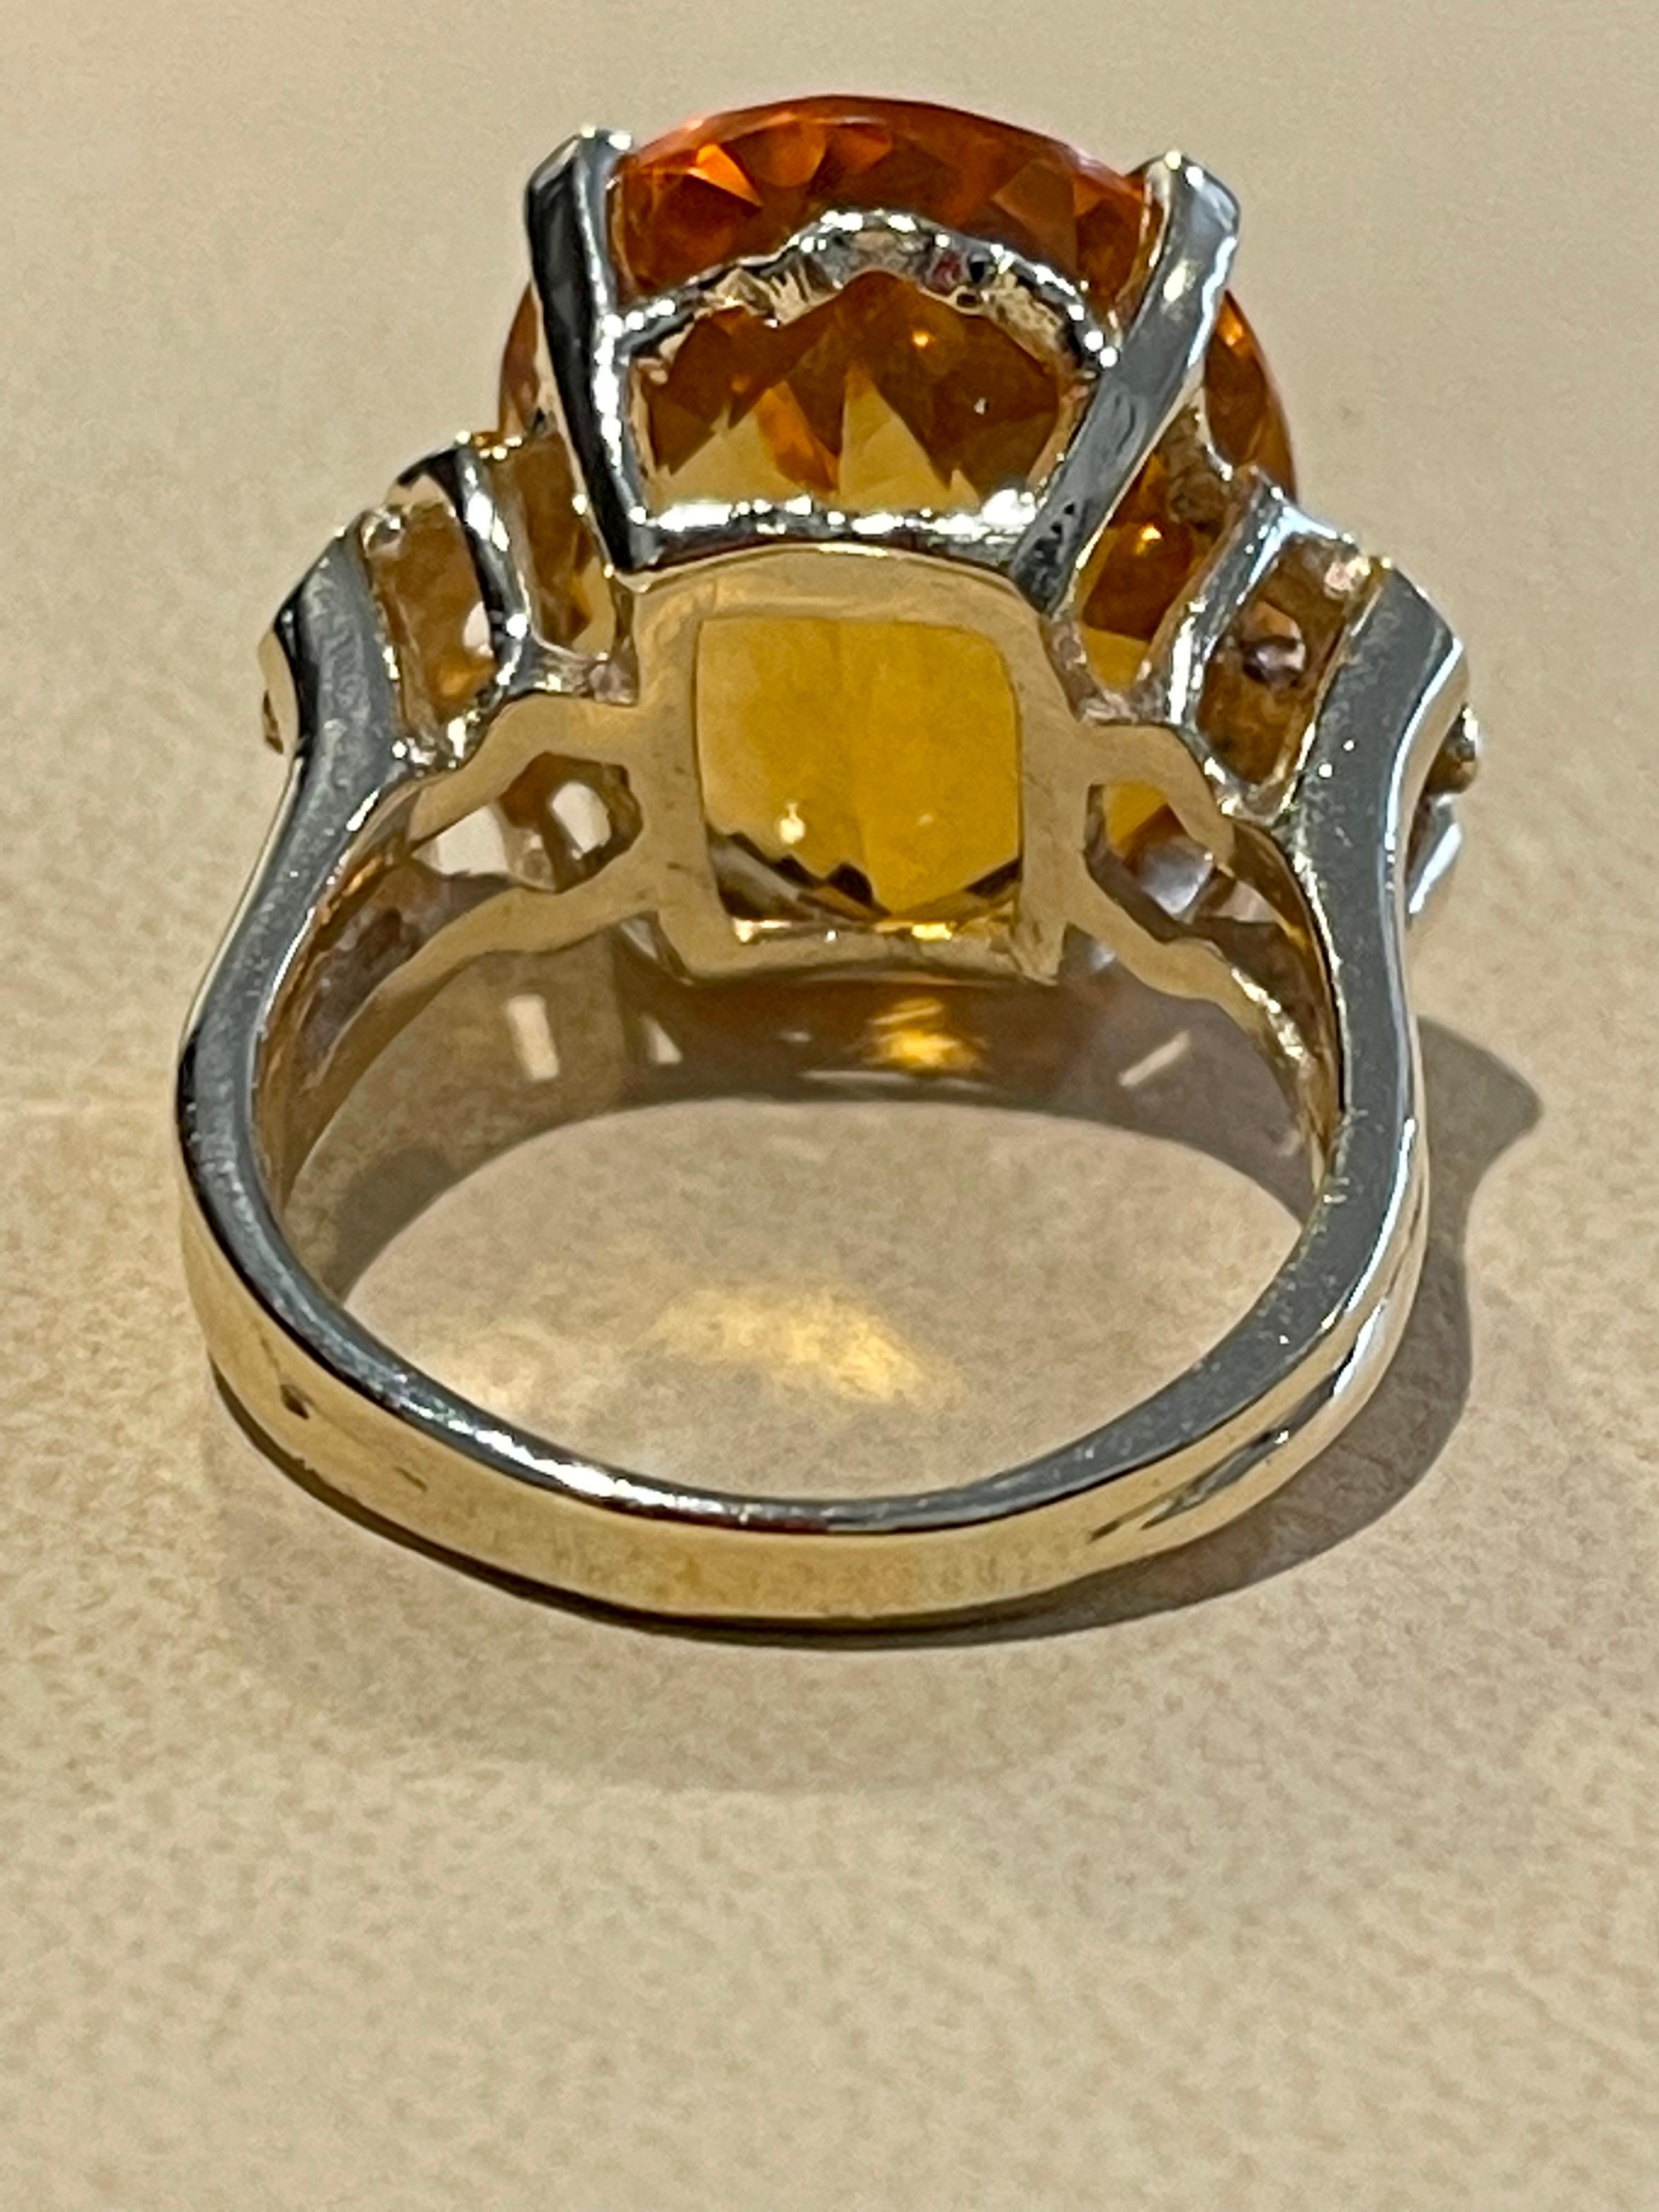 22 Carat Natural Oval Citrine Cocktail Ring in 14 Karat Yellow Gold, Estate For Sale 3